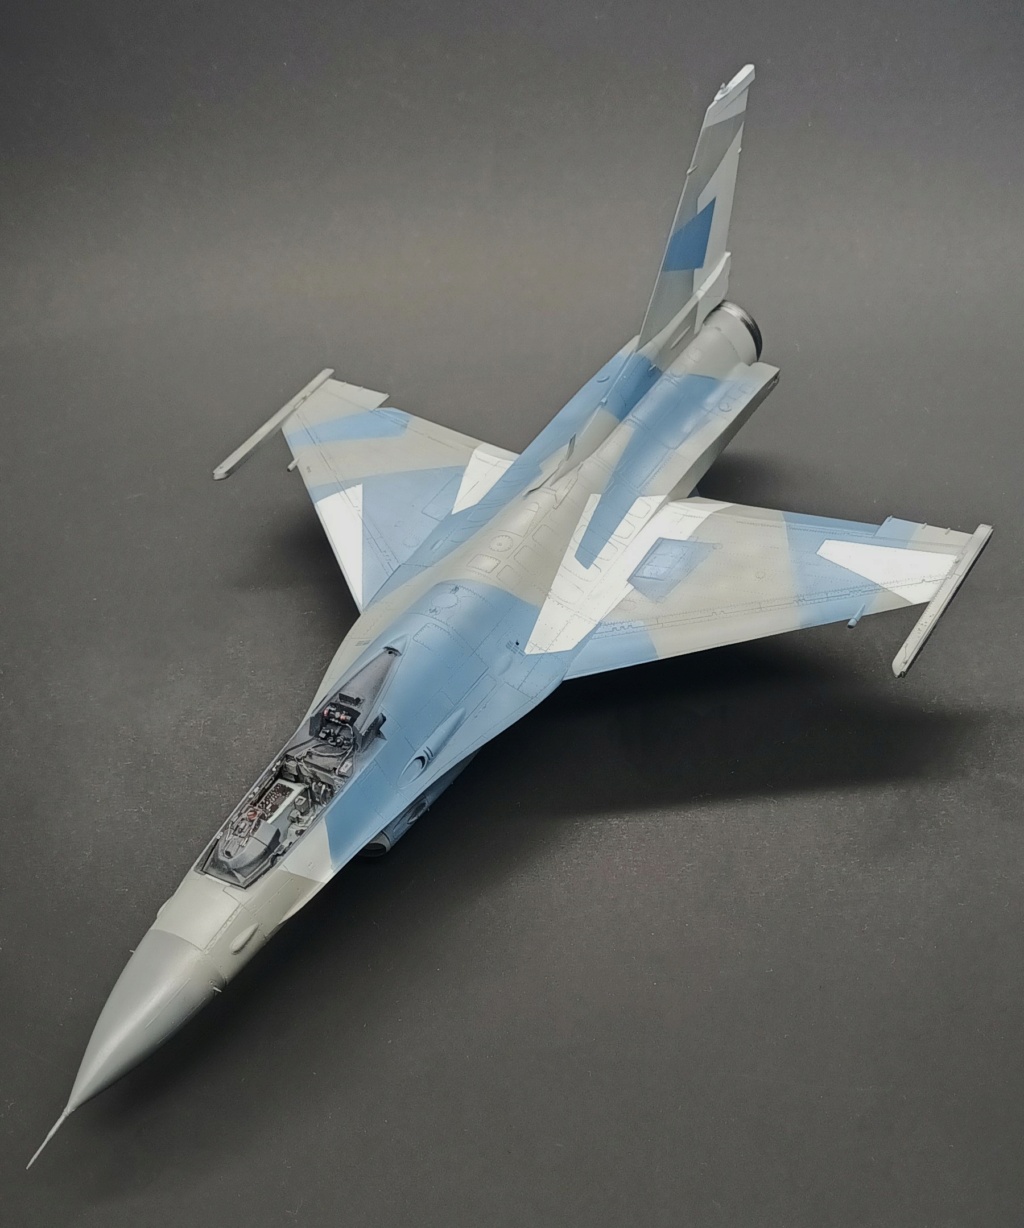 [Kinetic] 1/48  - McDonnell F/A-18A+ Hornet- VFC 12   / Double  [Tamiya] General Dynamics F-16C Fighting Falcon - 64th AGRS  1/48  - Aggressor - Page 3 20240217